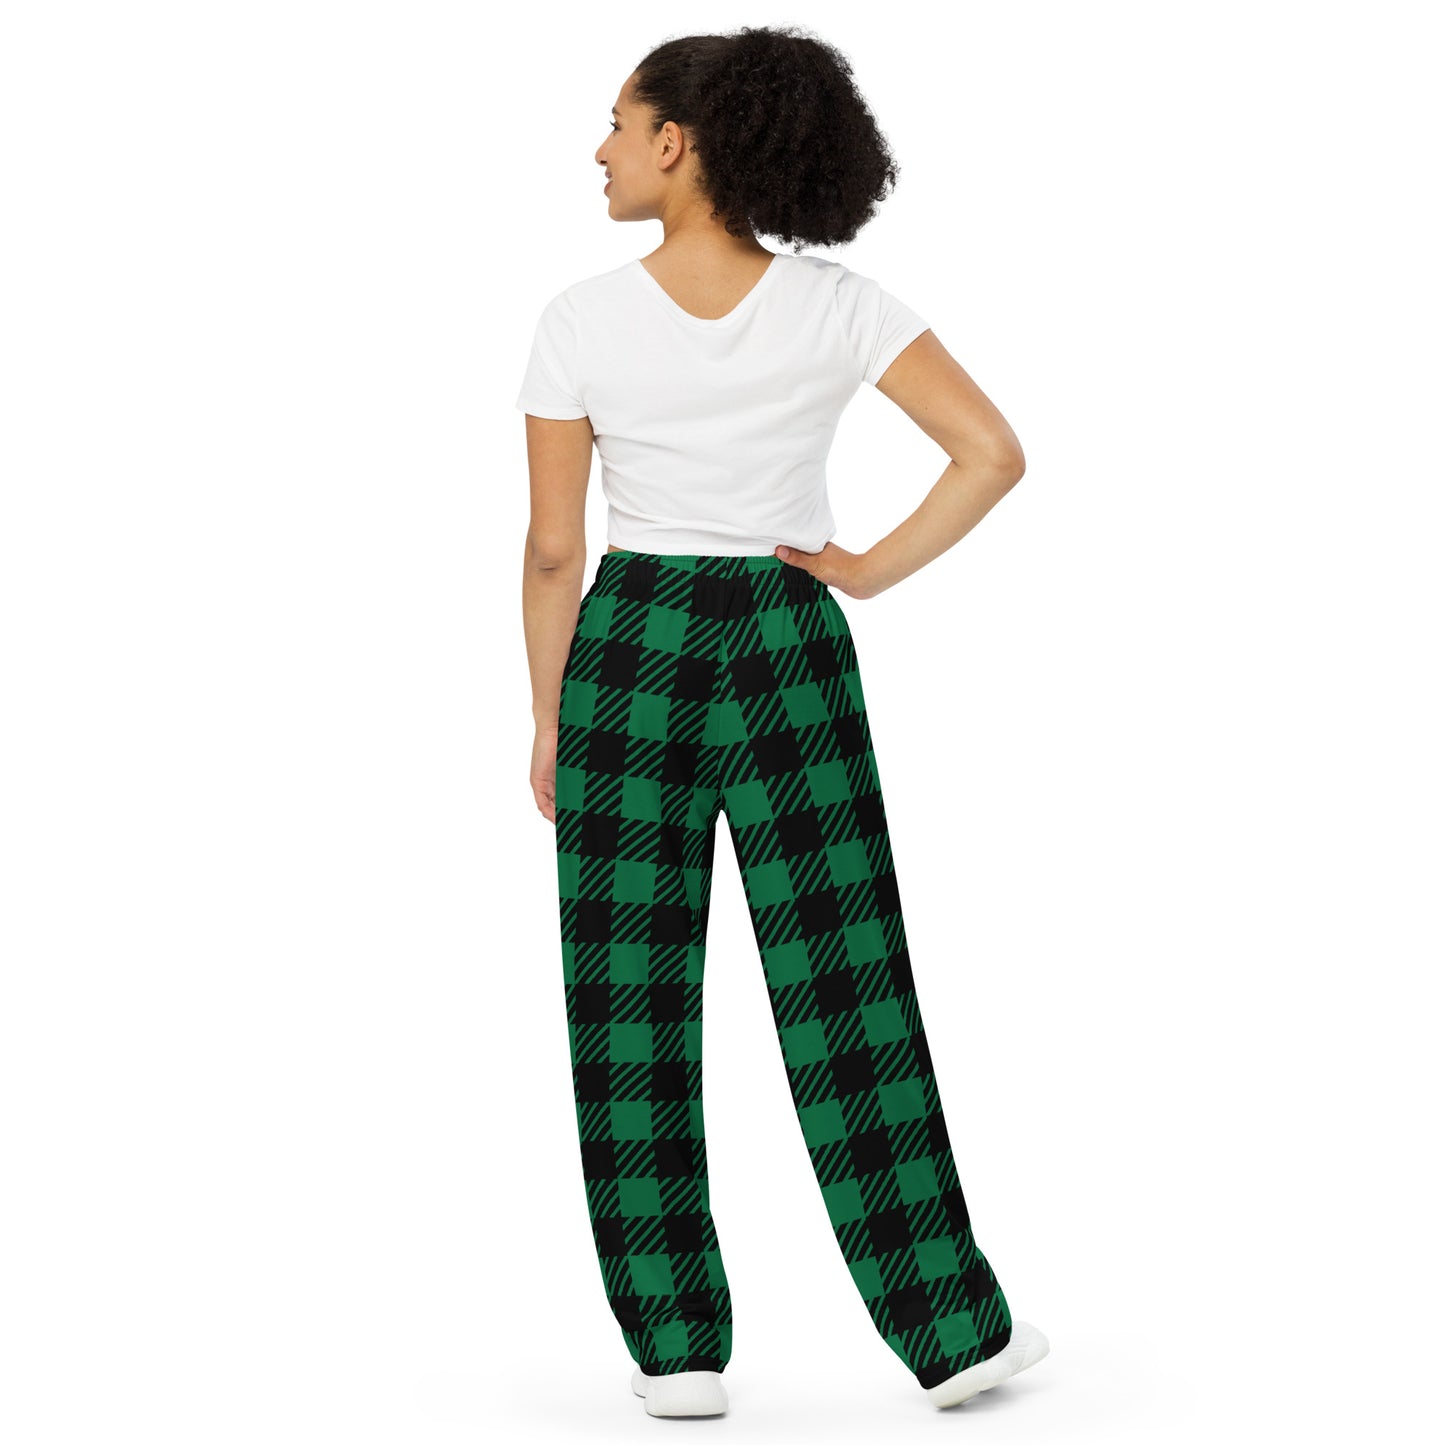 Chief Learning Officer Green Unisex Pajama Pants